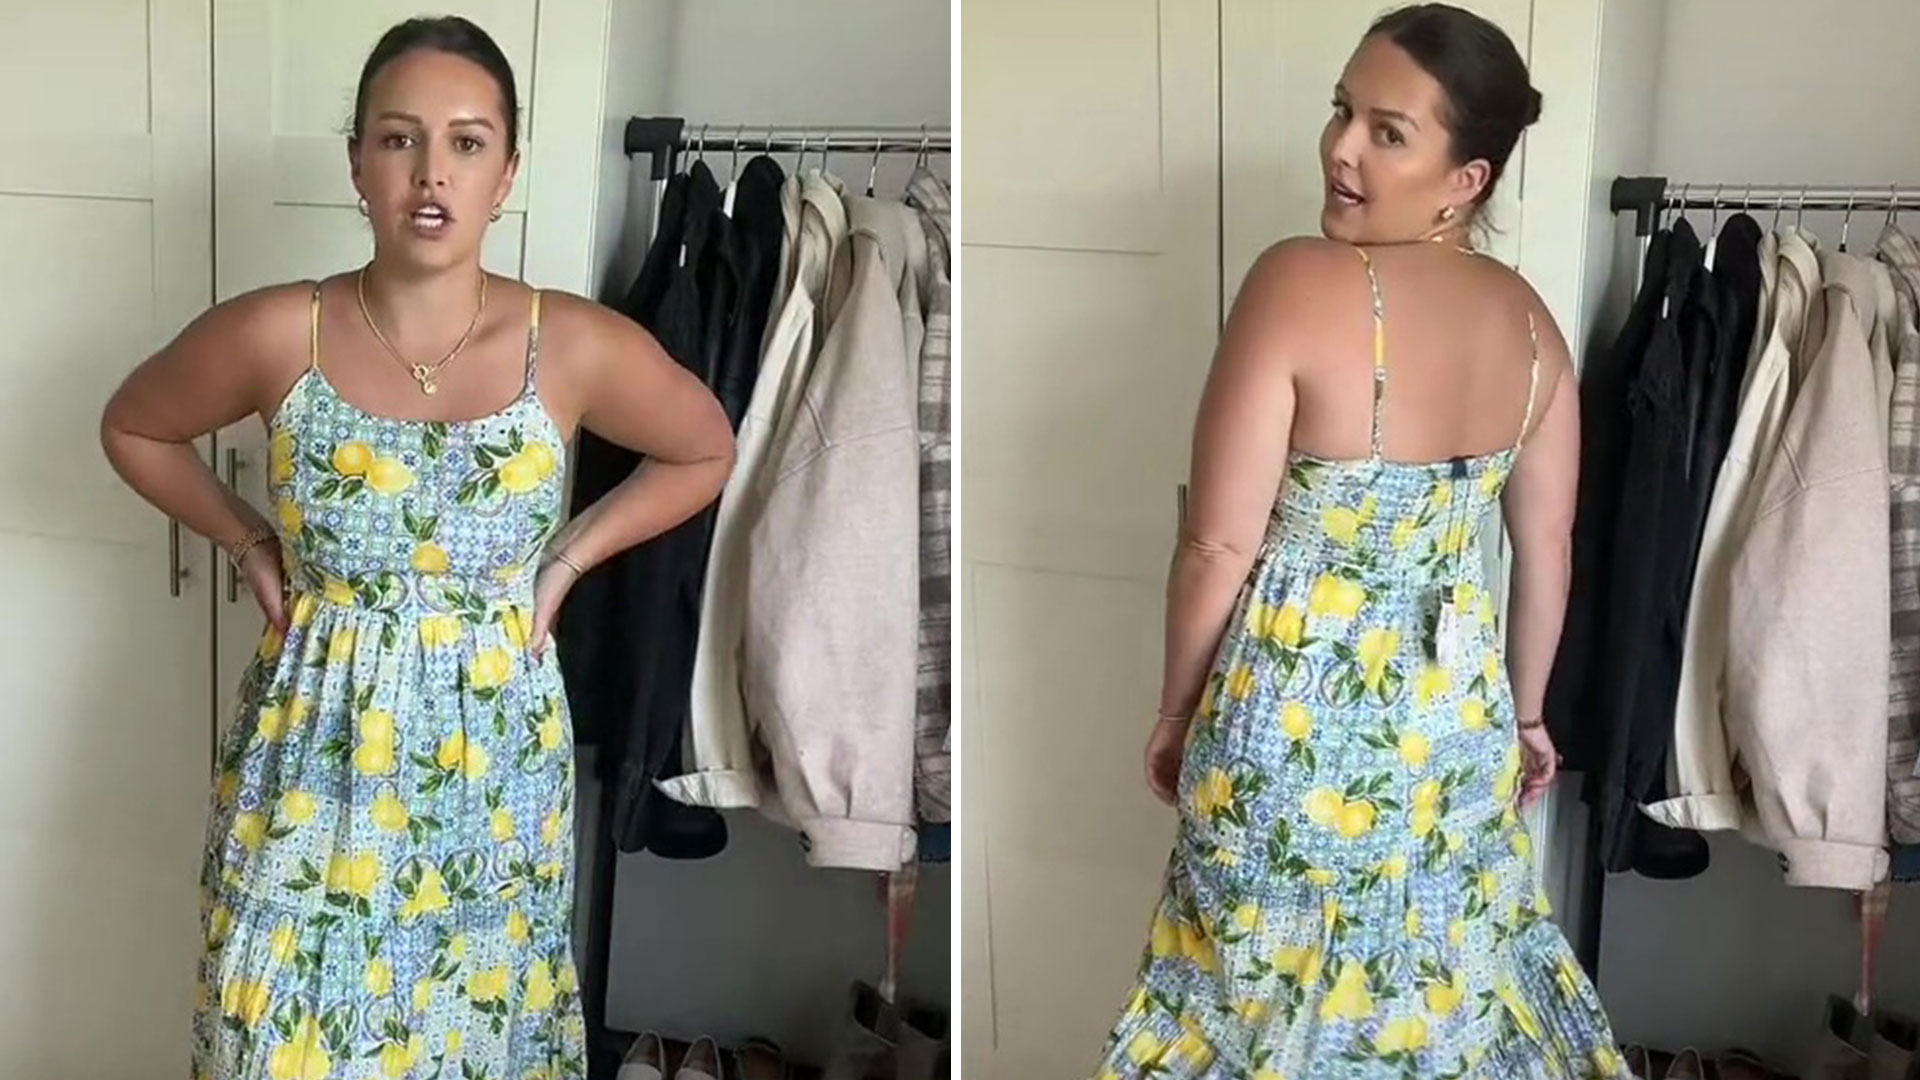 I’m midsize & found the perfect summer dress for £18 from Primark – it’s so pretty & gives Dolce and Gabbana vibes